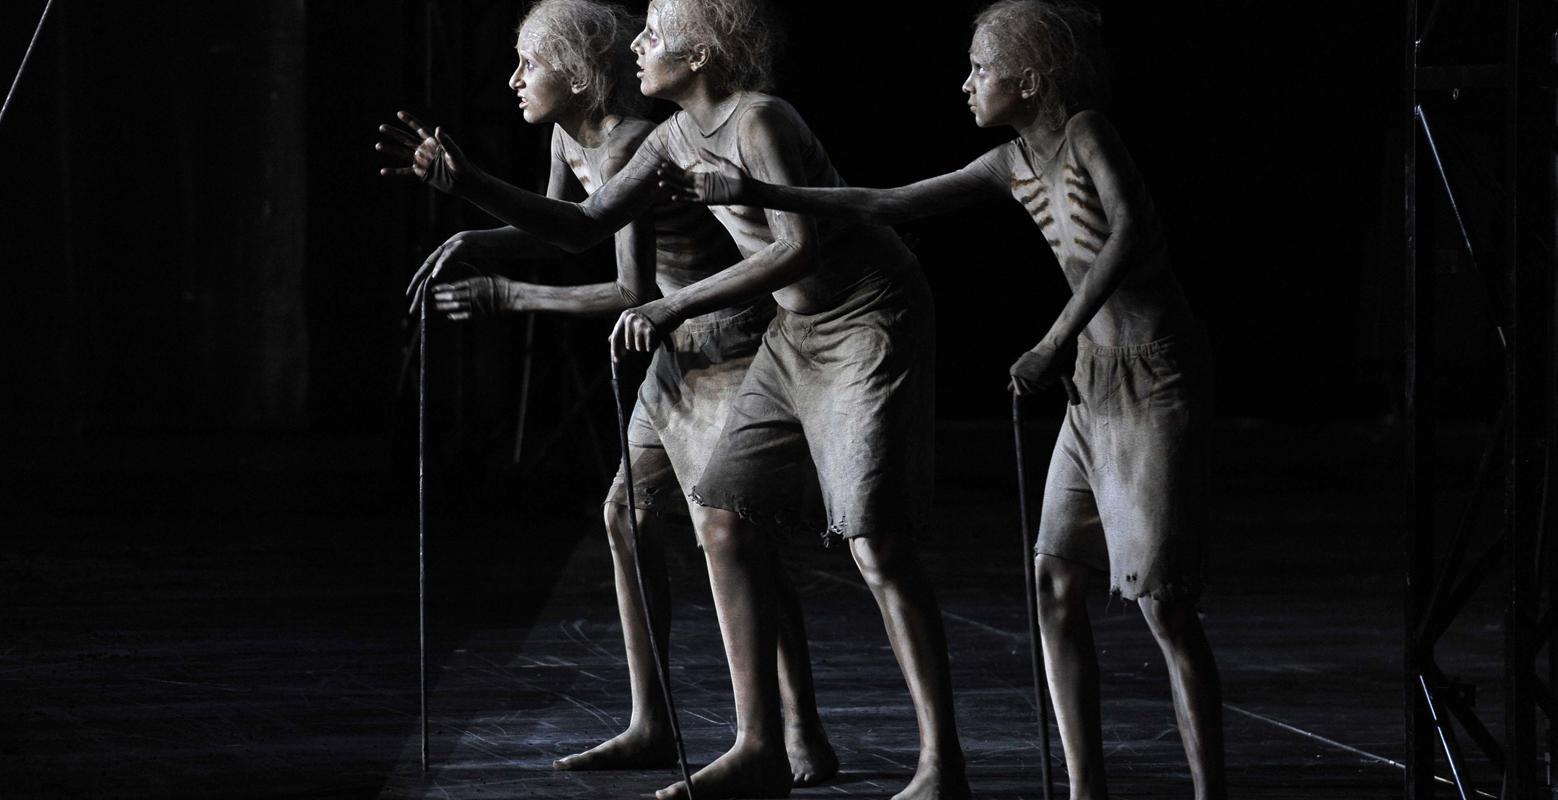 Three skeletons with walking sticks holding out their hands in ENO's The Magic Flute